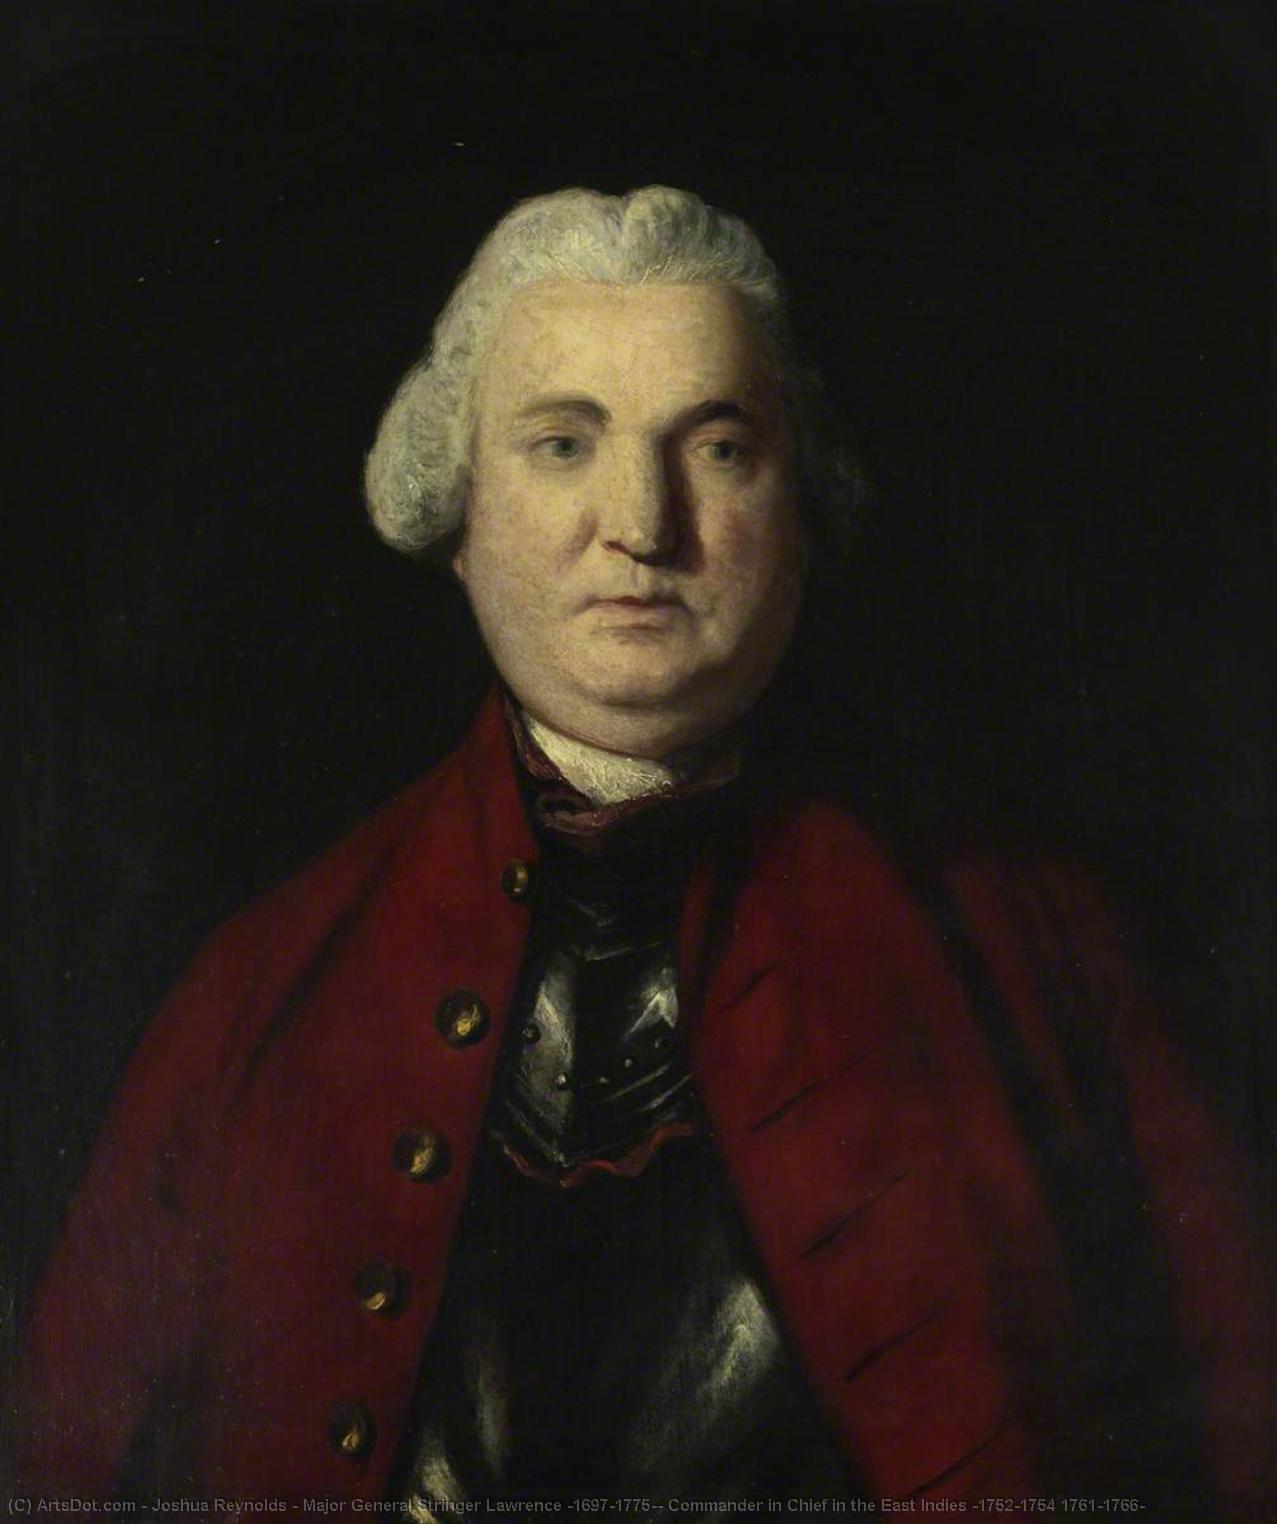 Buy Museum Art Reproductions Major General Stringer Lawrence (1697–1775), Commander in Chief in the East Indies (1752–1754 1761–1766), 1761 by Joshua Reynolds | ArtsDot.com